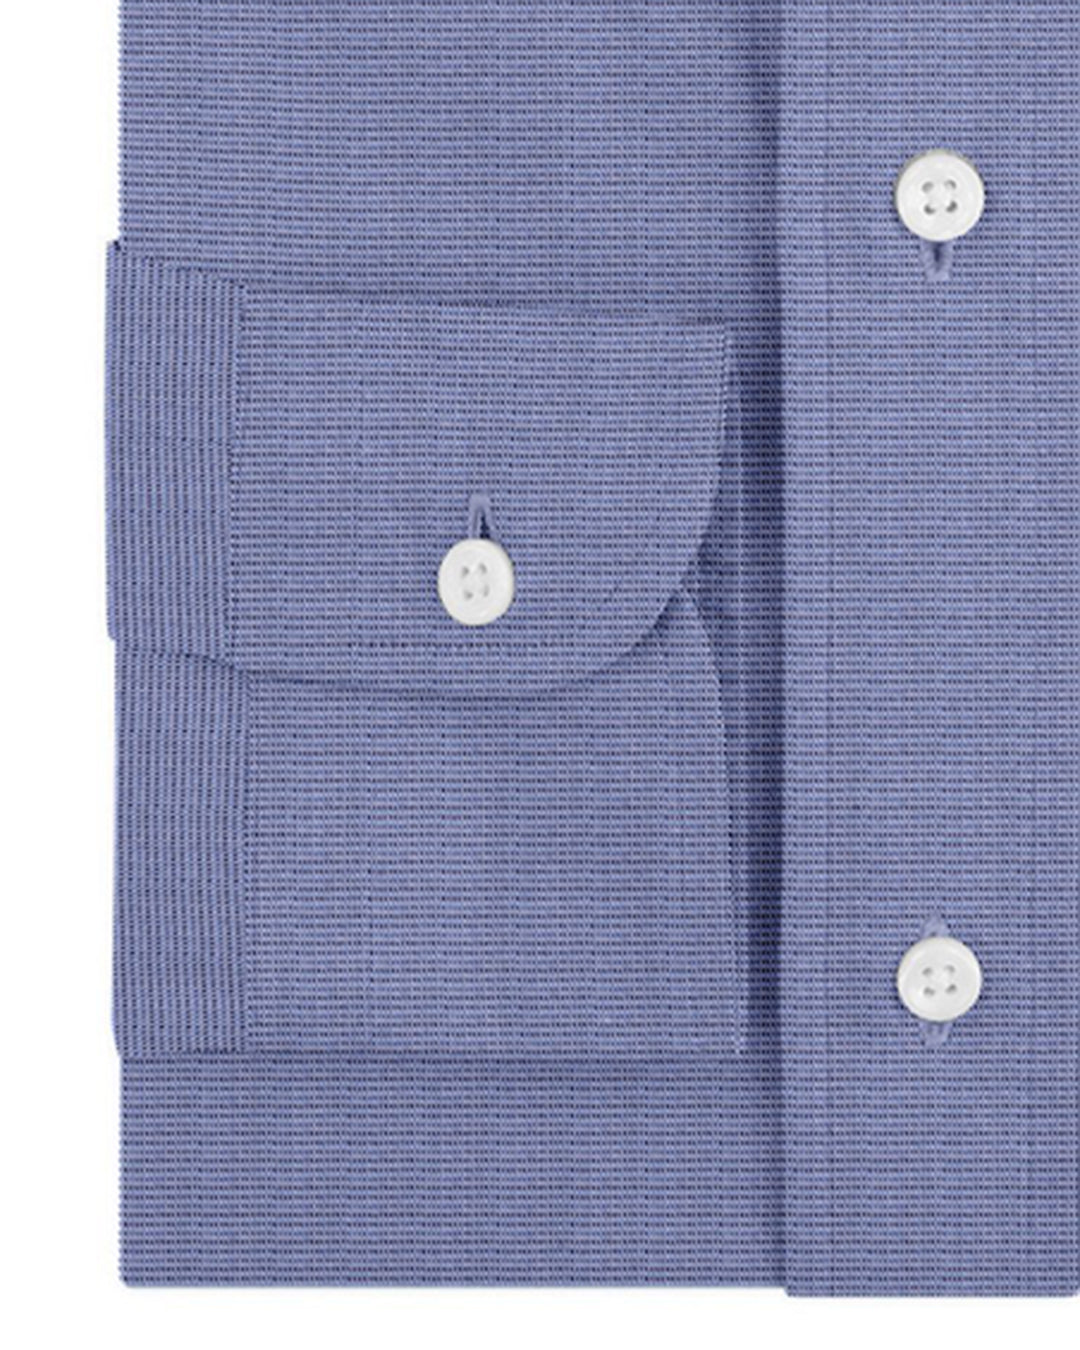 Cuff of the custom linen shirt for men in mid blue chambray by Luxire Clothing